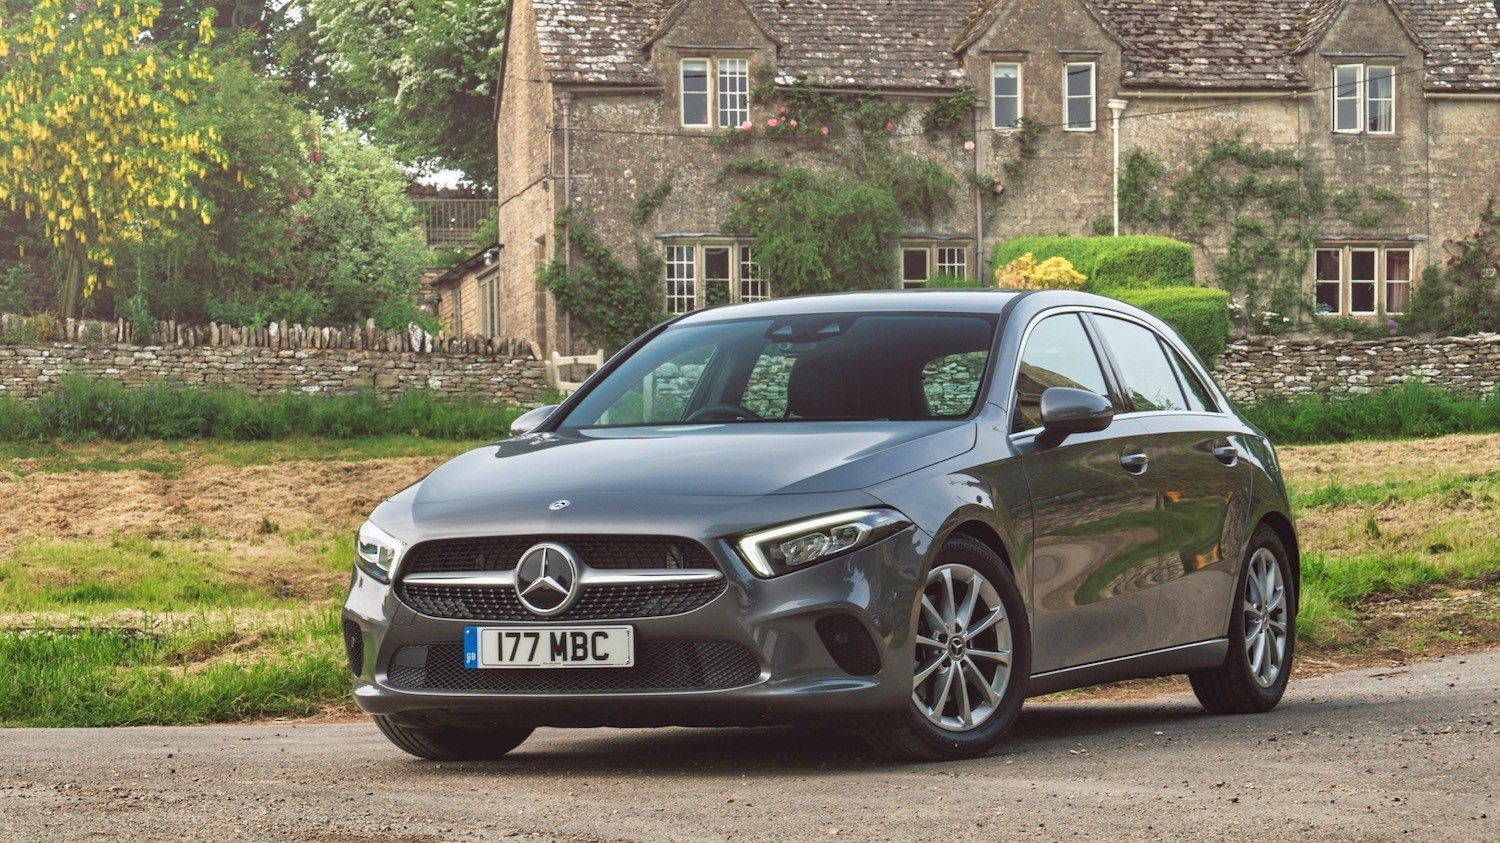 Tim Barnes-Clay reviews the New Mercedes-Benz A-Class 30